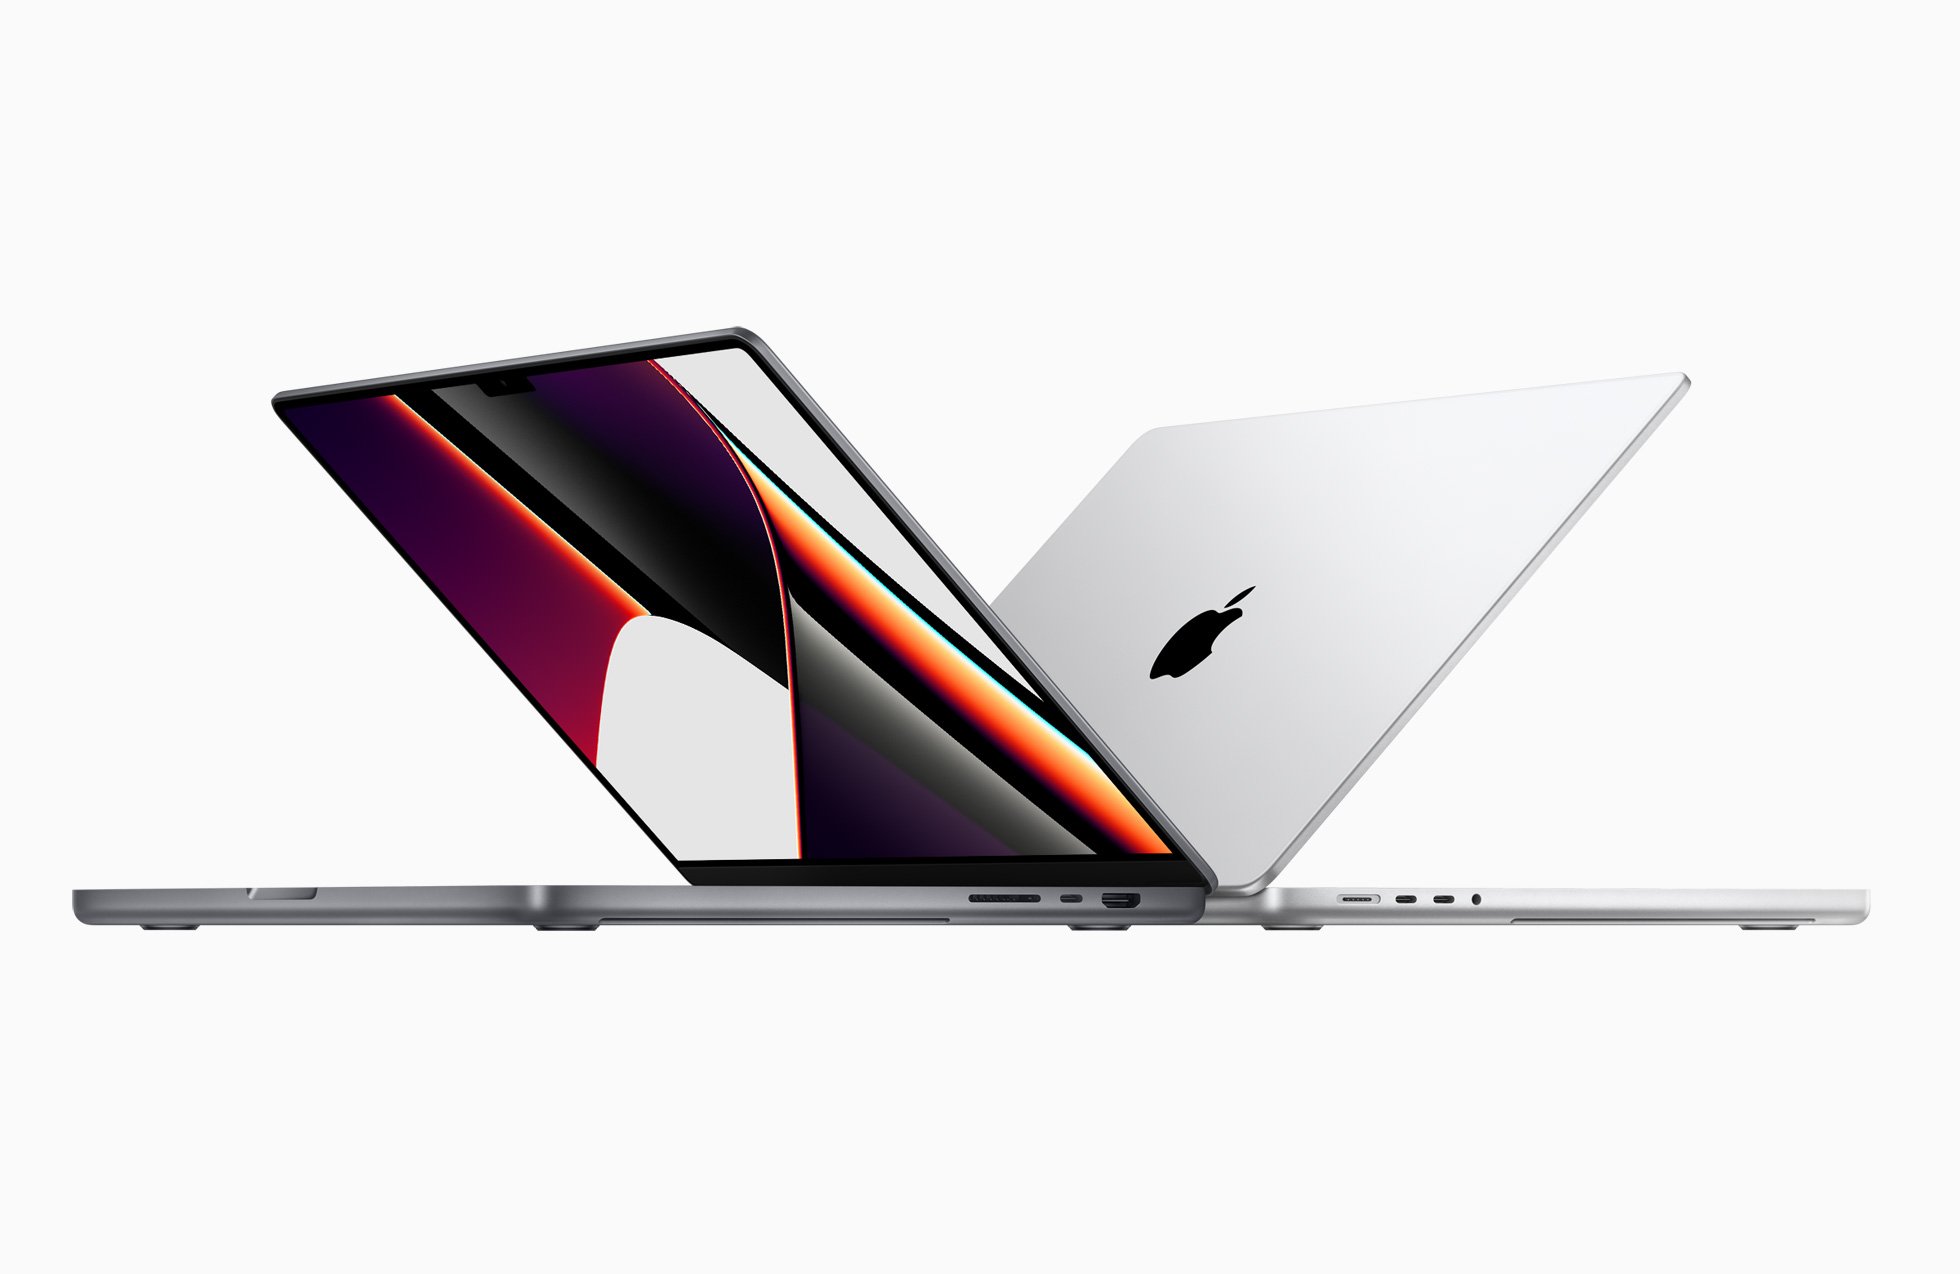 It had been rumored, but did anyone really think even Apple would do it? Oh, they did it all right. The all-new MacBook Pro has a freaking notch. I'm 